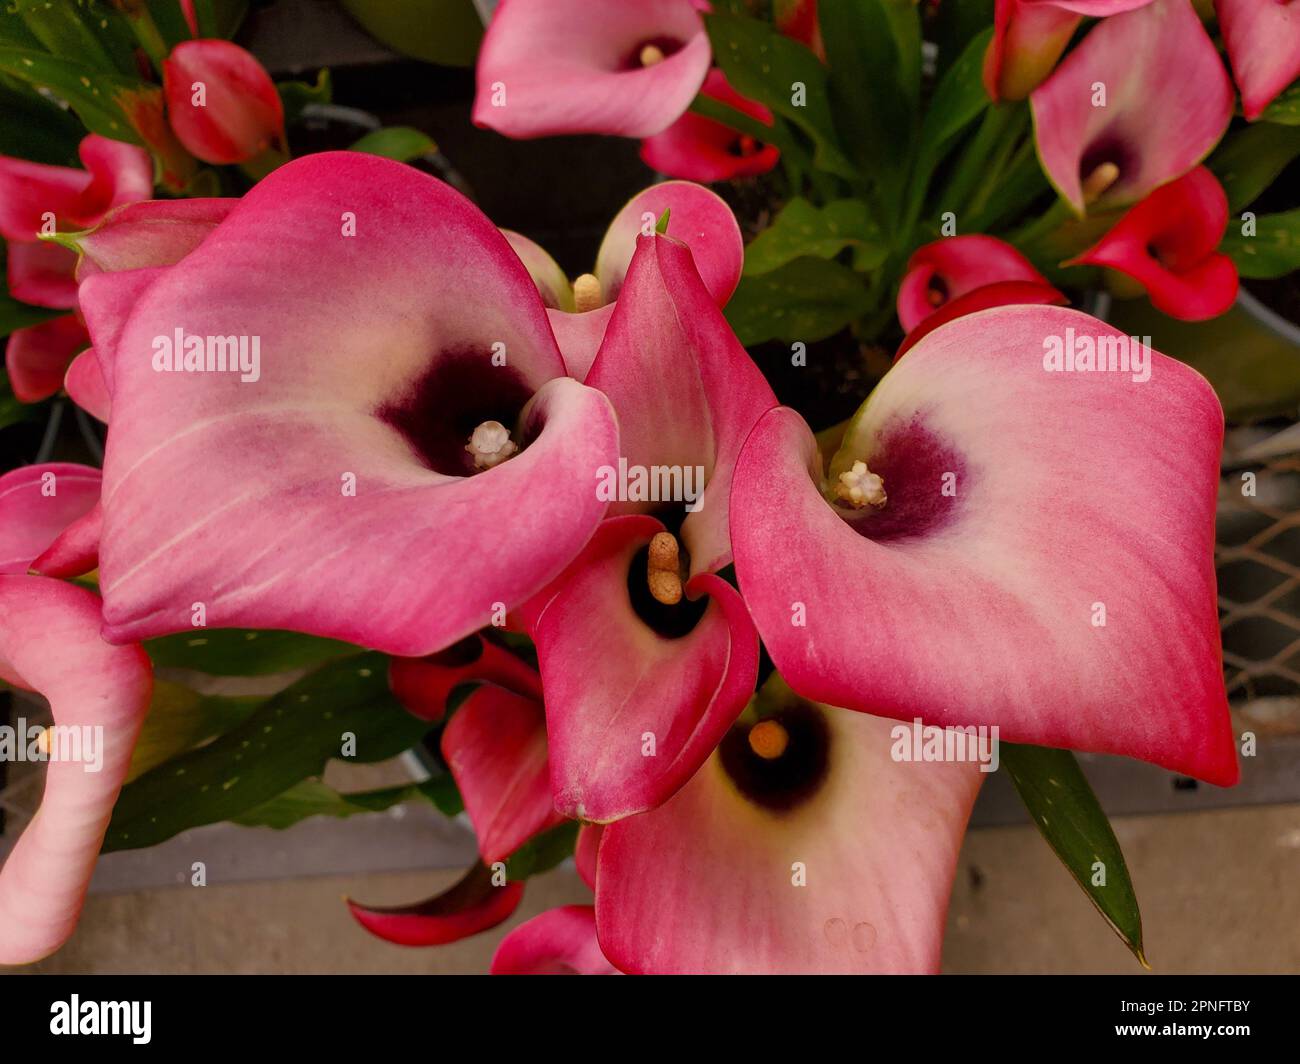 Beautiful bright pink color of Captain Cheerio Calla Lily flowers Stock Photo